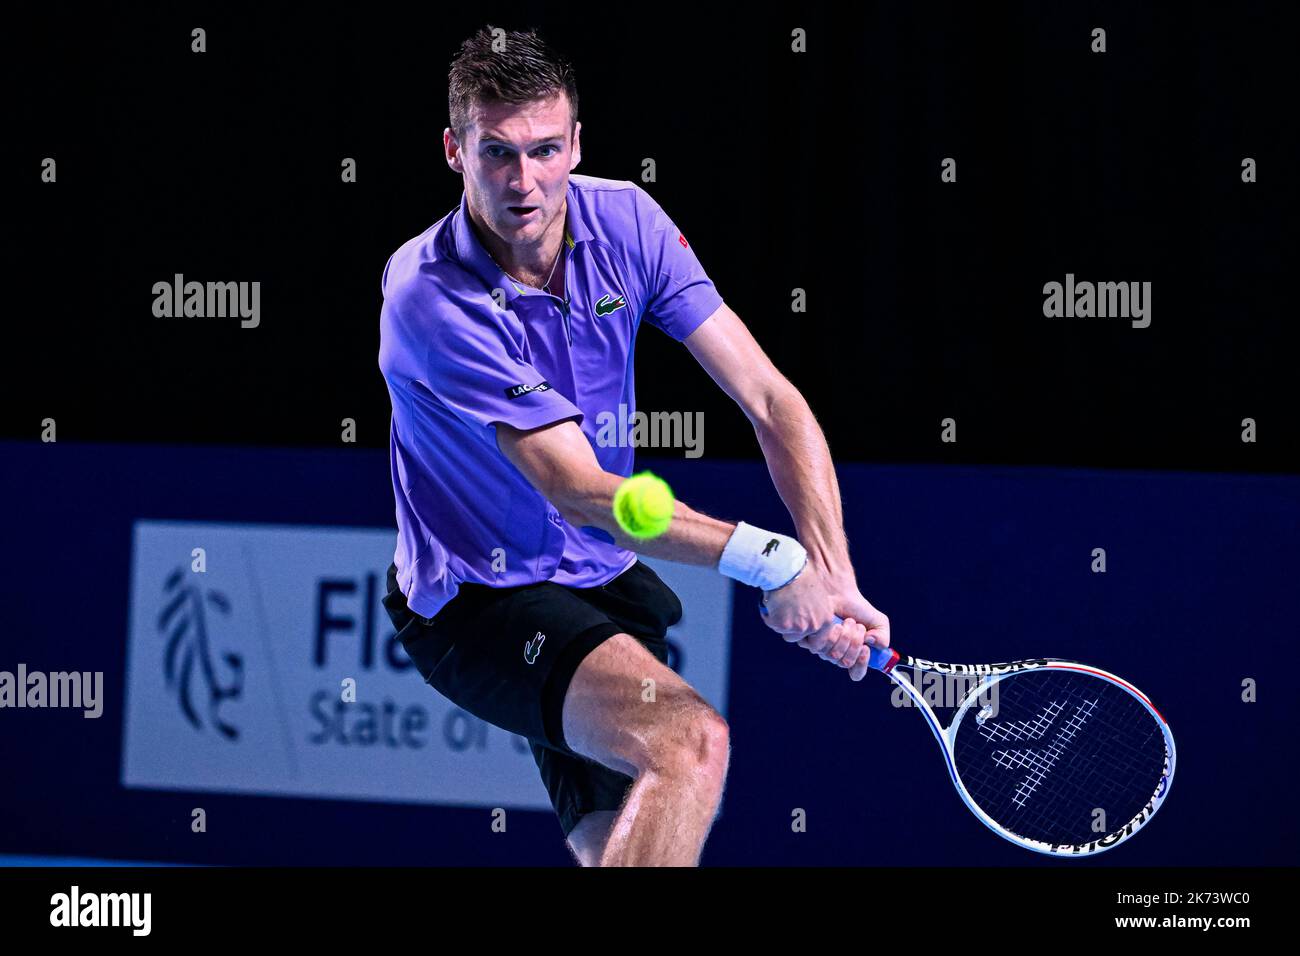 French Manuel Guinard pictured in action during the qualification game  between French Guinard and Dutch De Jong at the European Open Tennis ATP  tournament, in Antwerp, Monday 17 October 2022. BELGA PHOTO